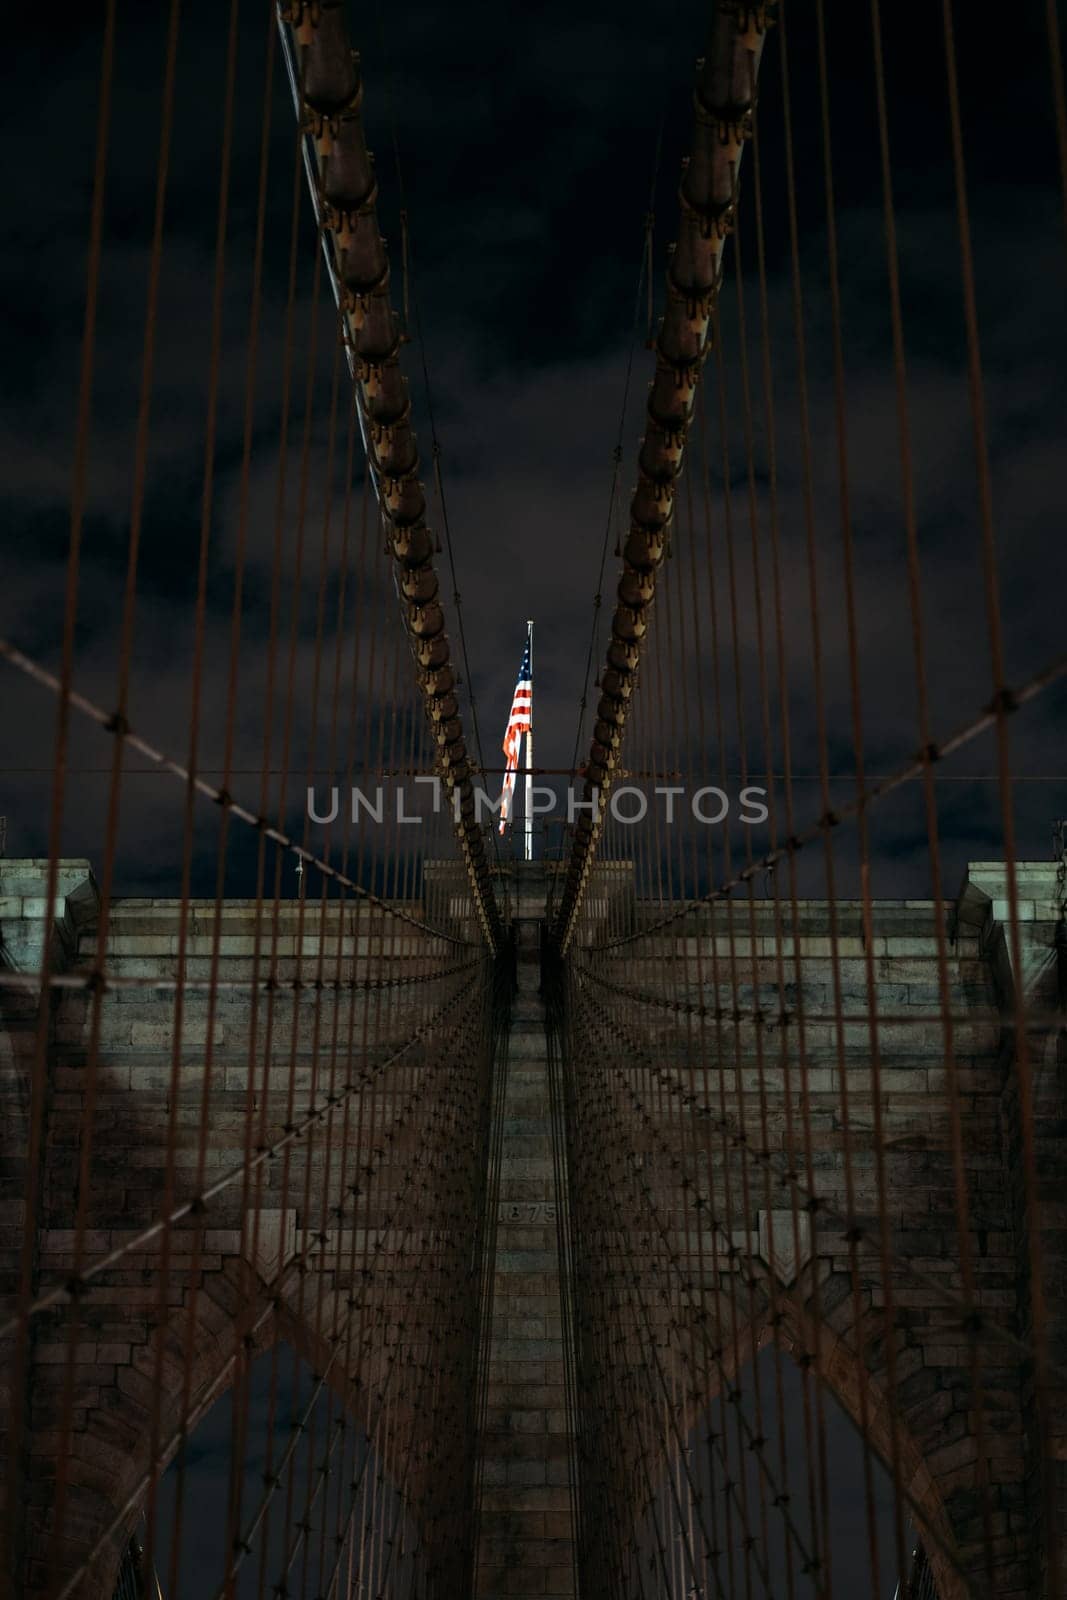 A captivating view of the Brooklyn Bridge at night featuring an American flag illuminated at the center. The iconic structure is showcased against a dark sky, highlighting its architectural beauty.